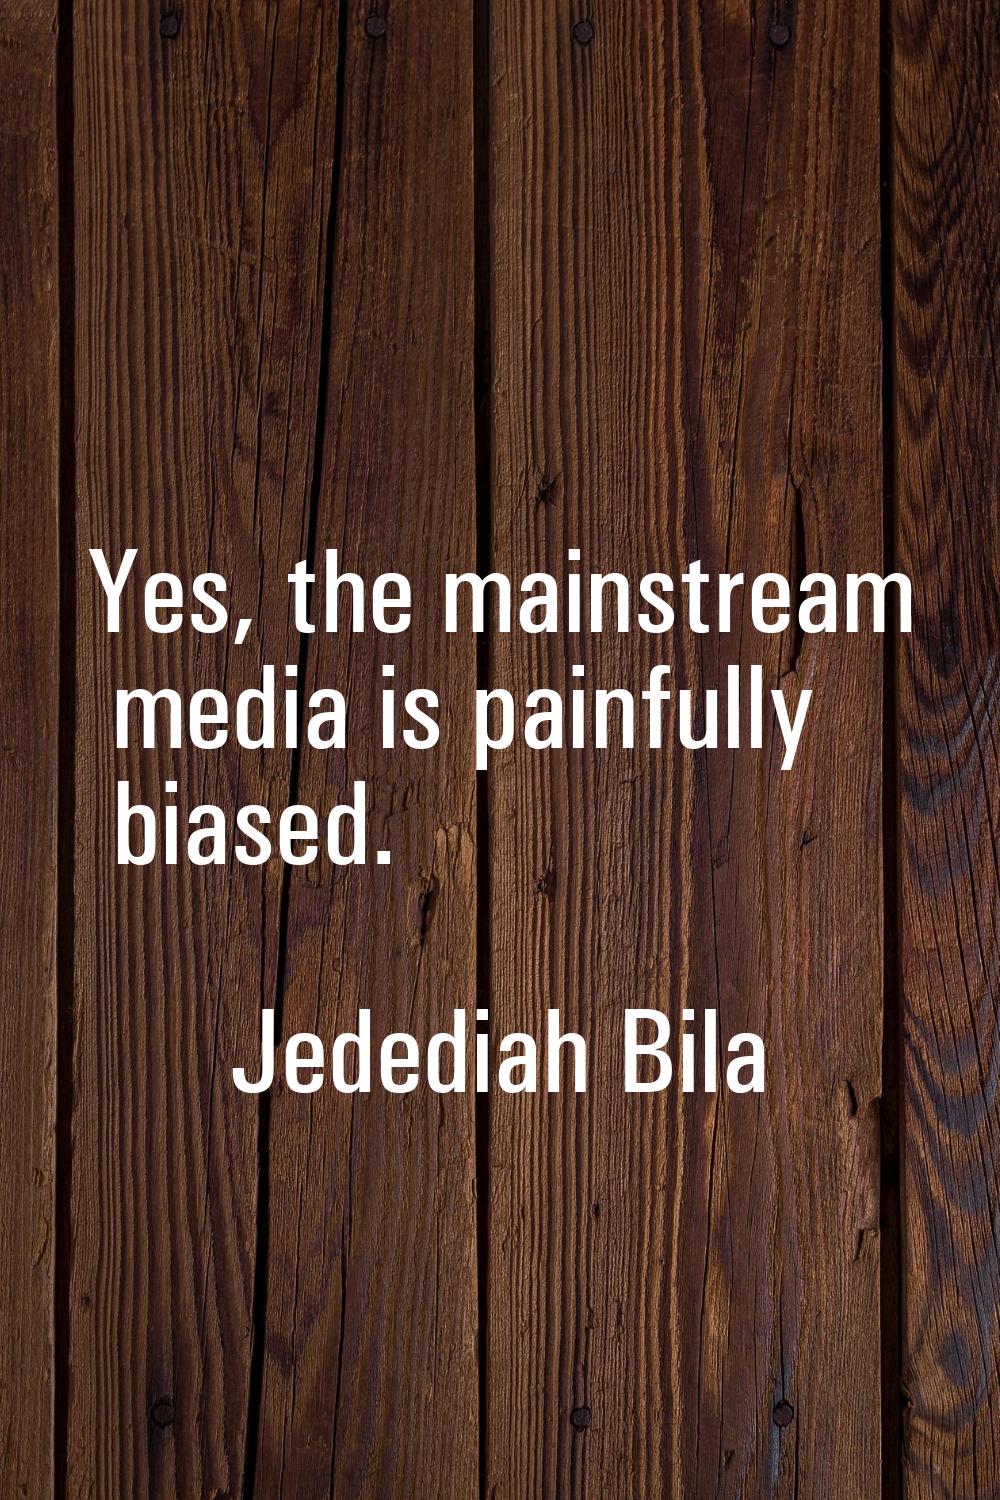 Yes, the mainstream media is painfully biased.